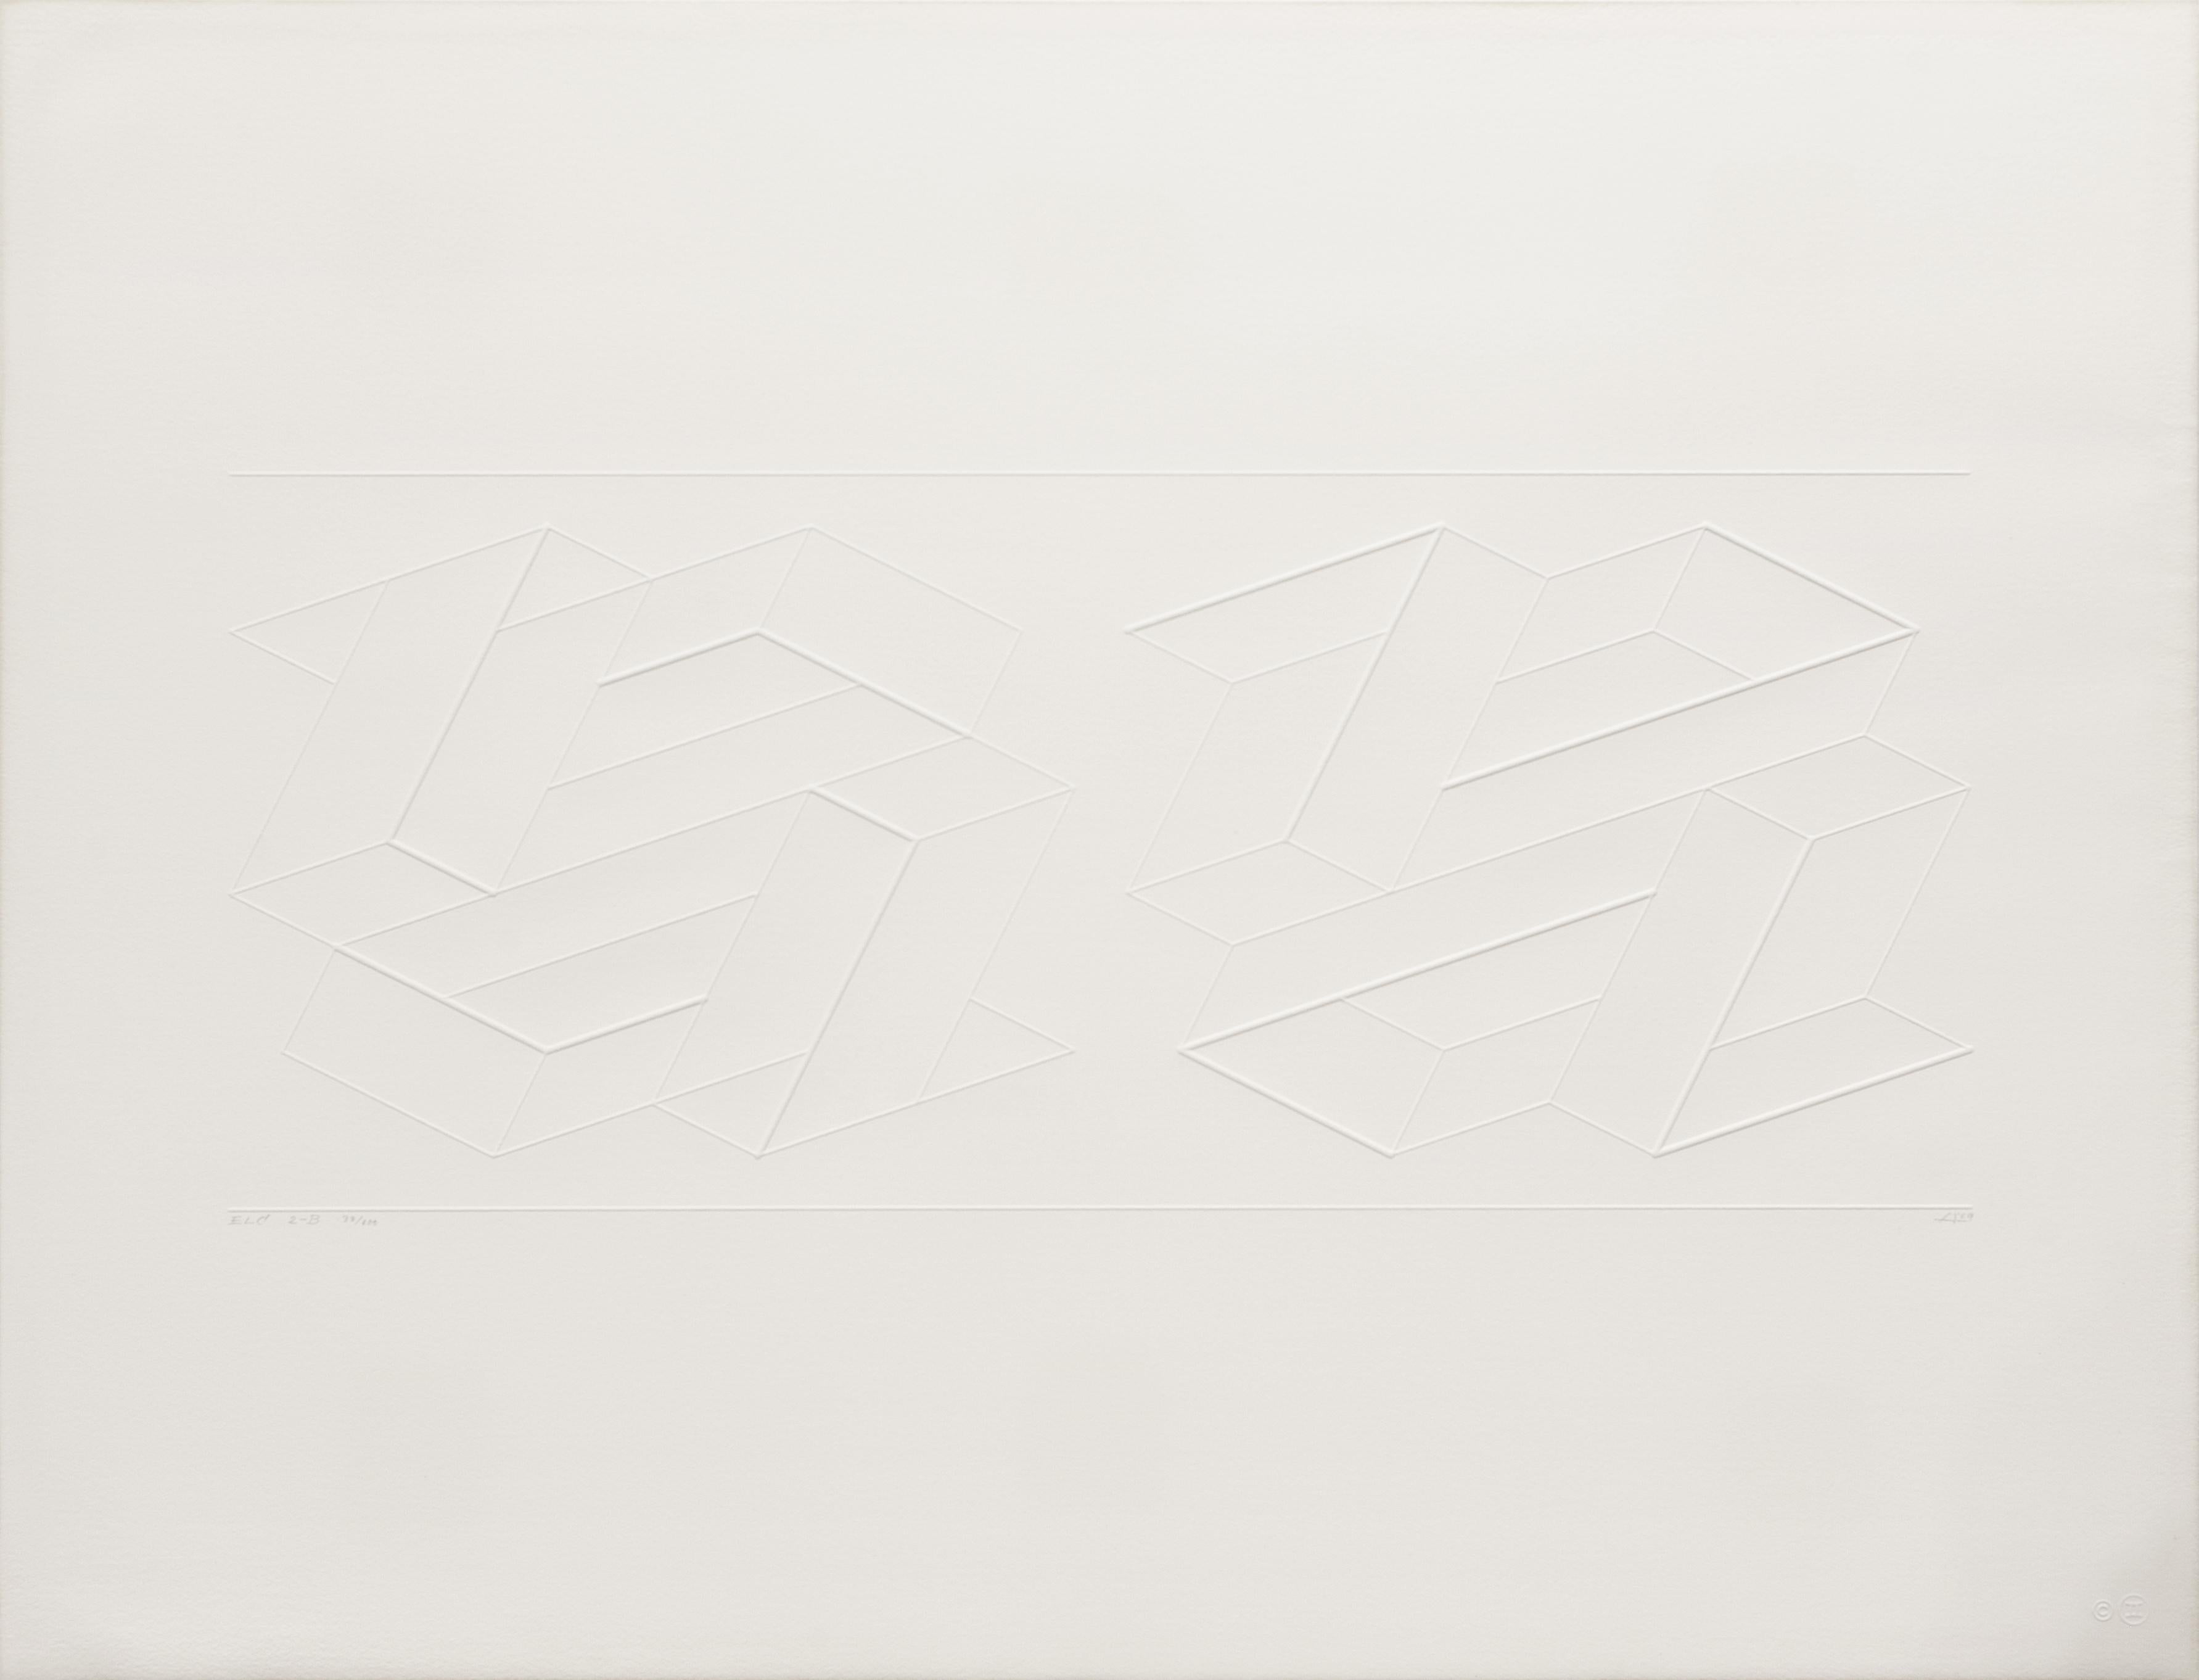 Embossed Linear Constructions (ELC) 2-B, 1969 - Print by Josef Albers